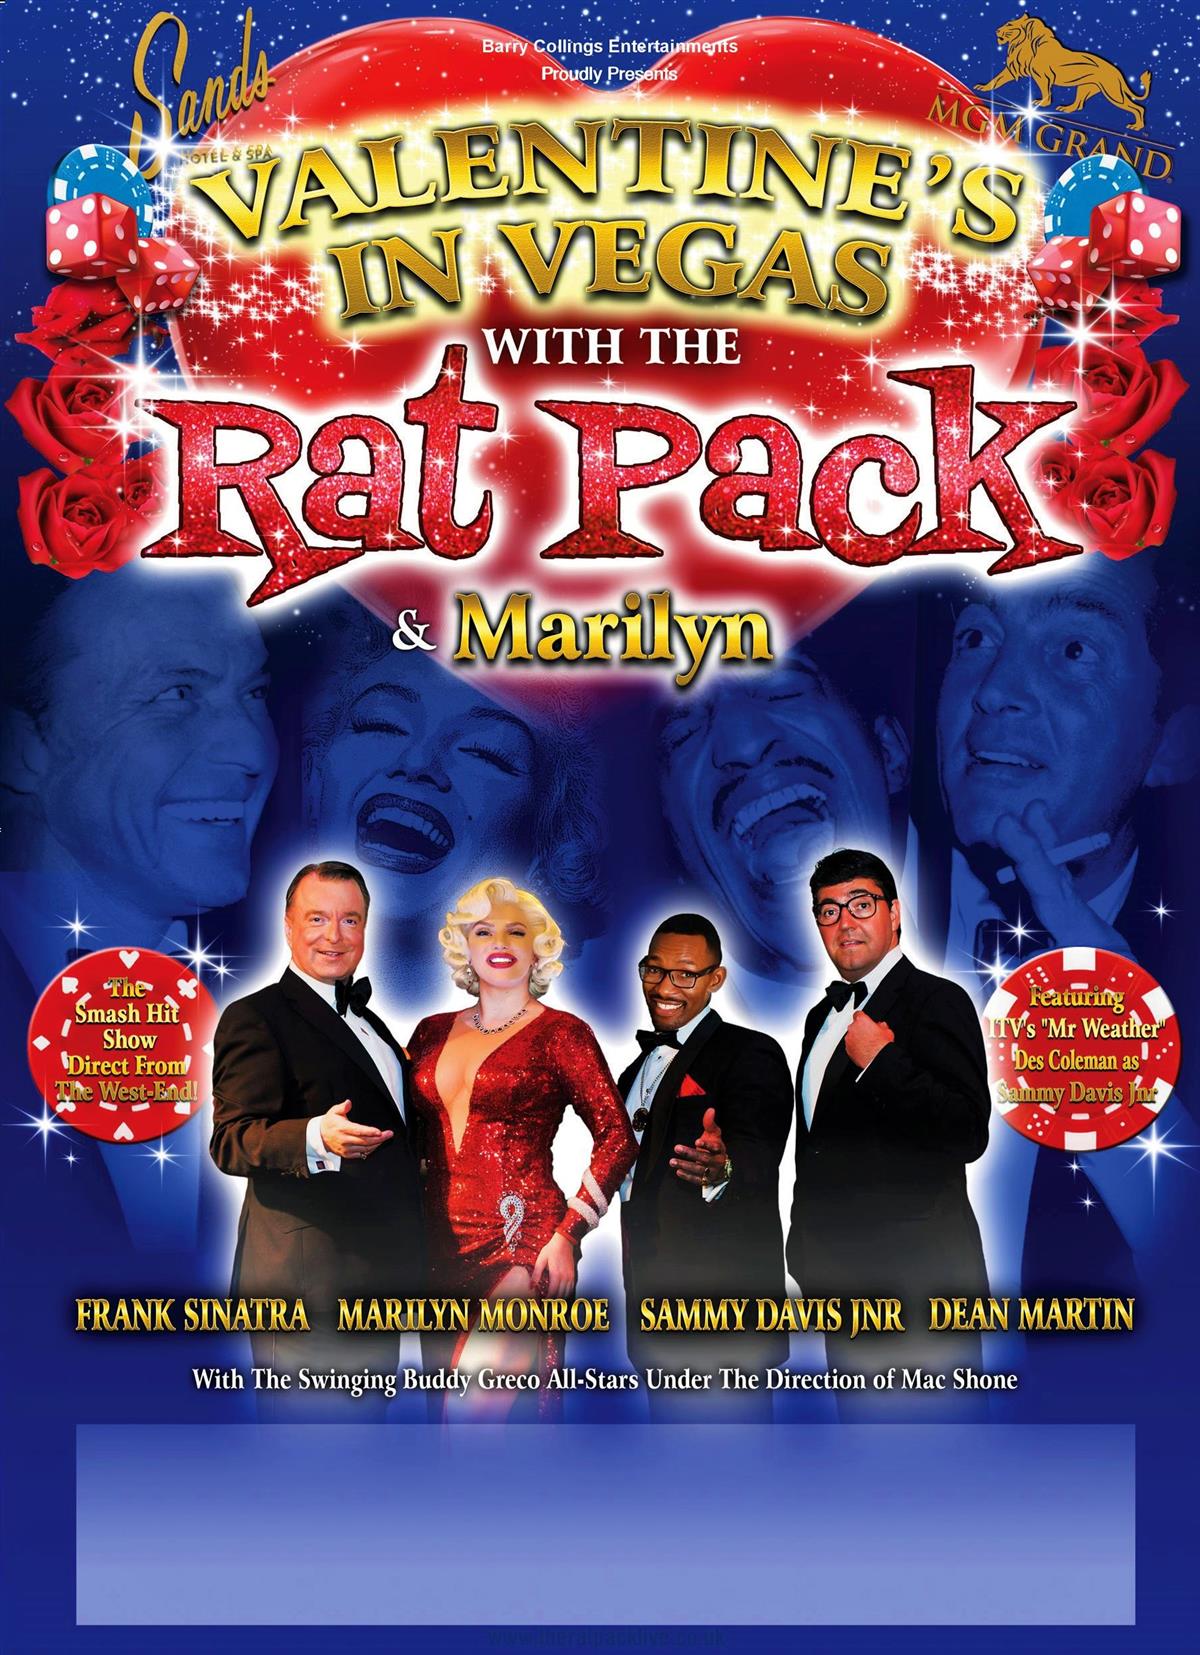 Valentines in Vegas with The Rat Pack & Marilyn